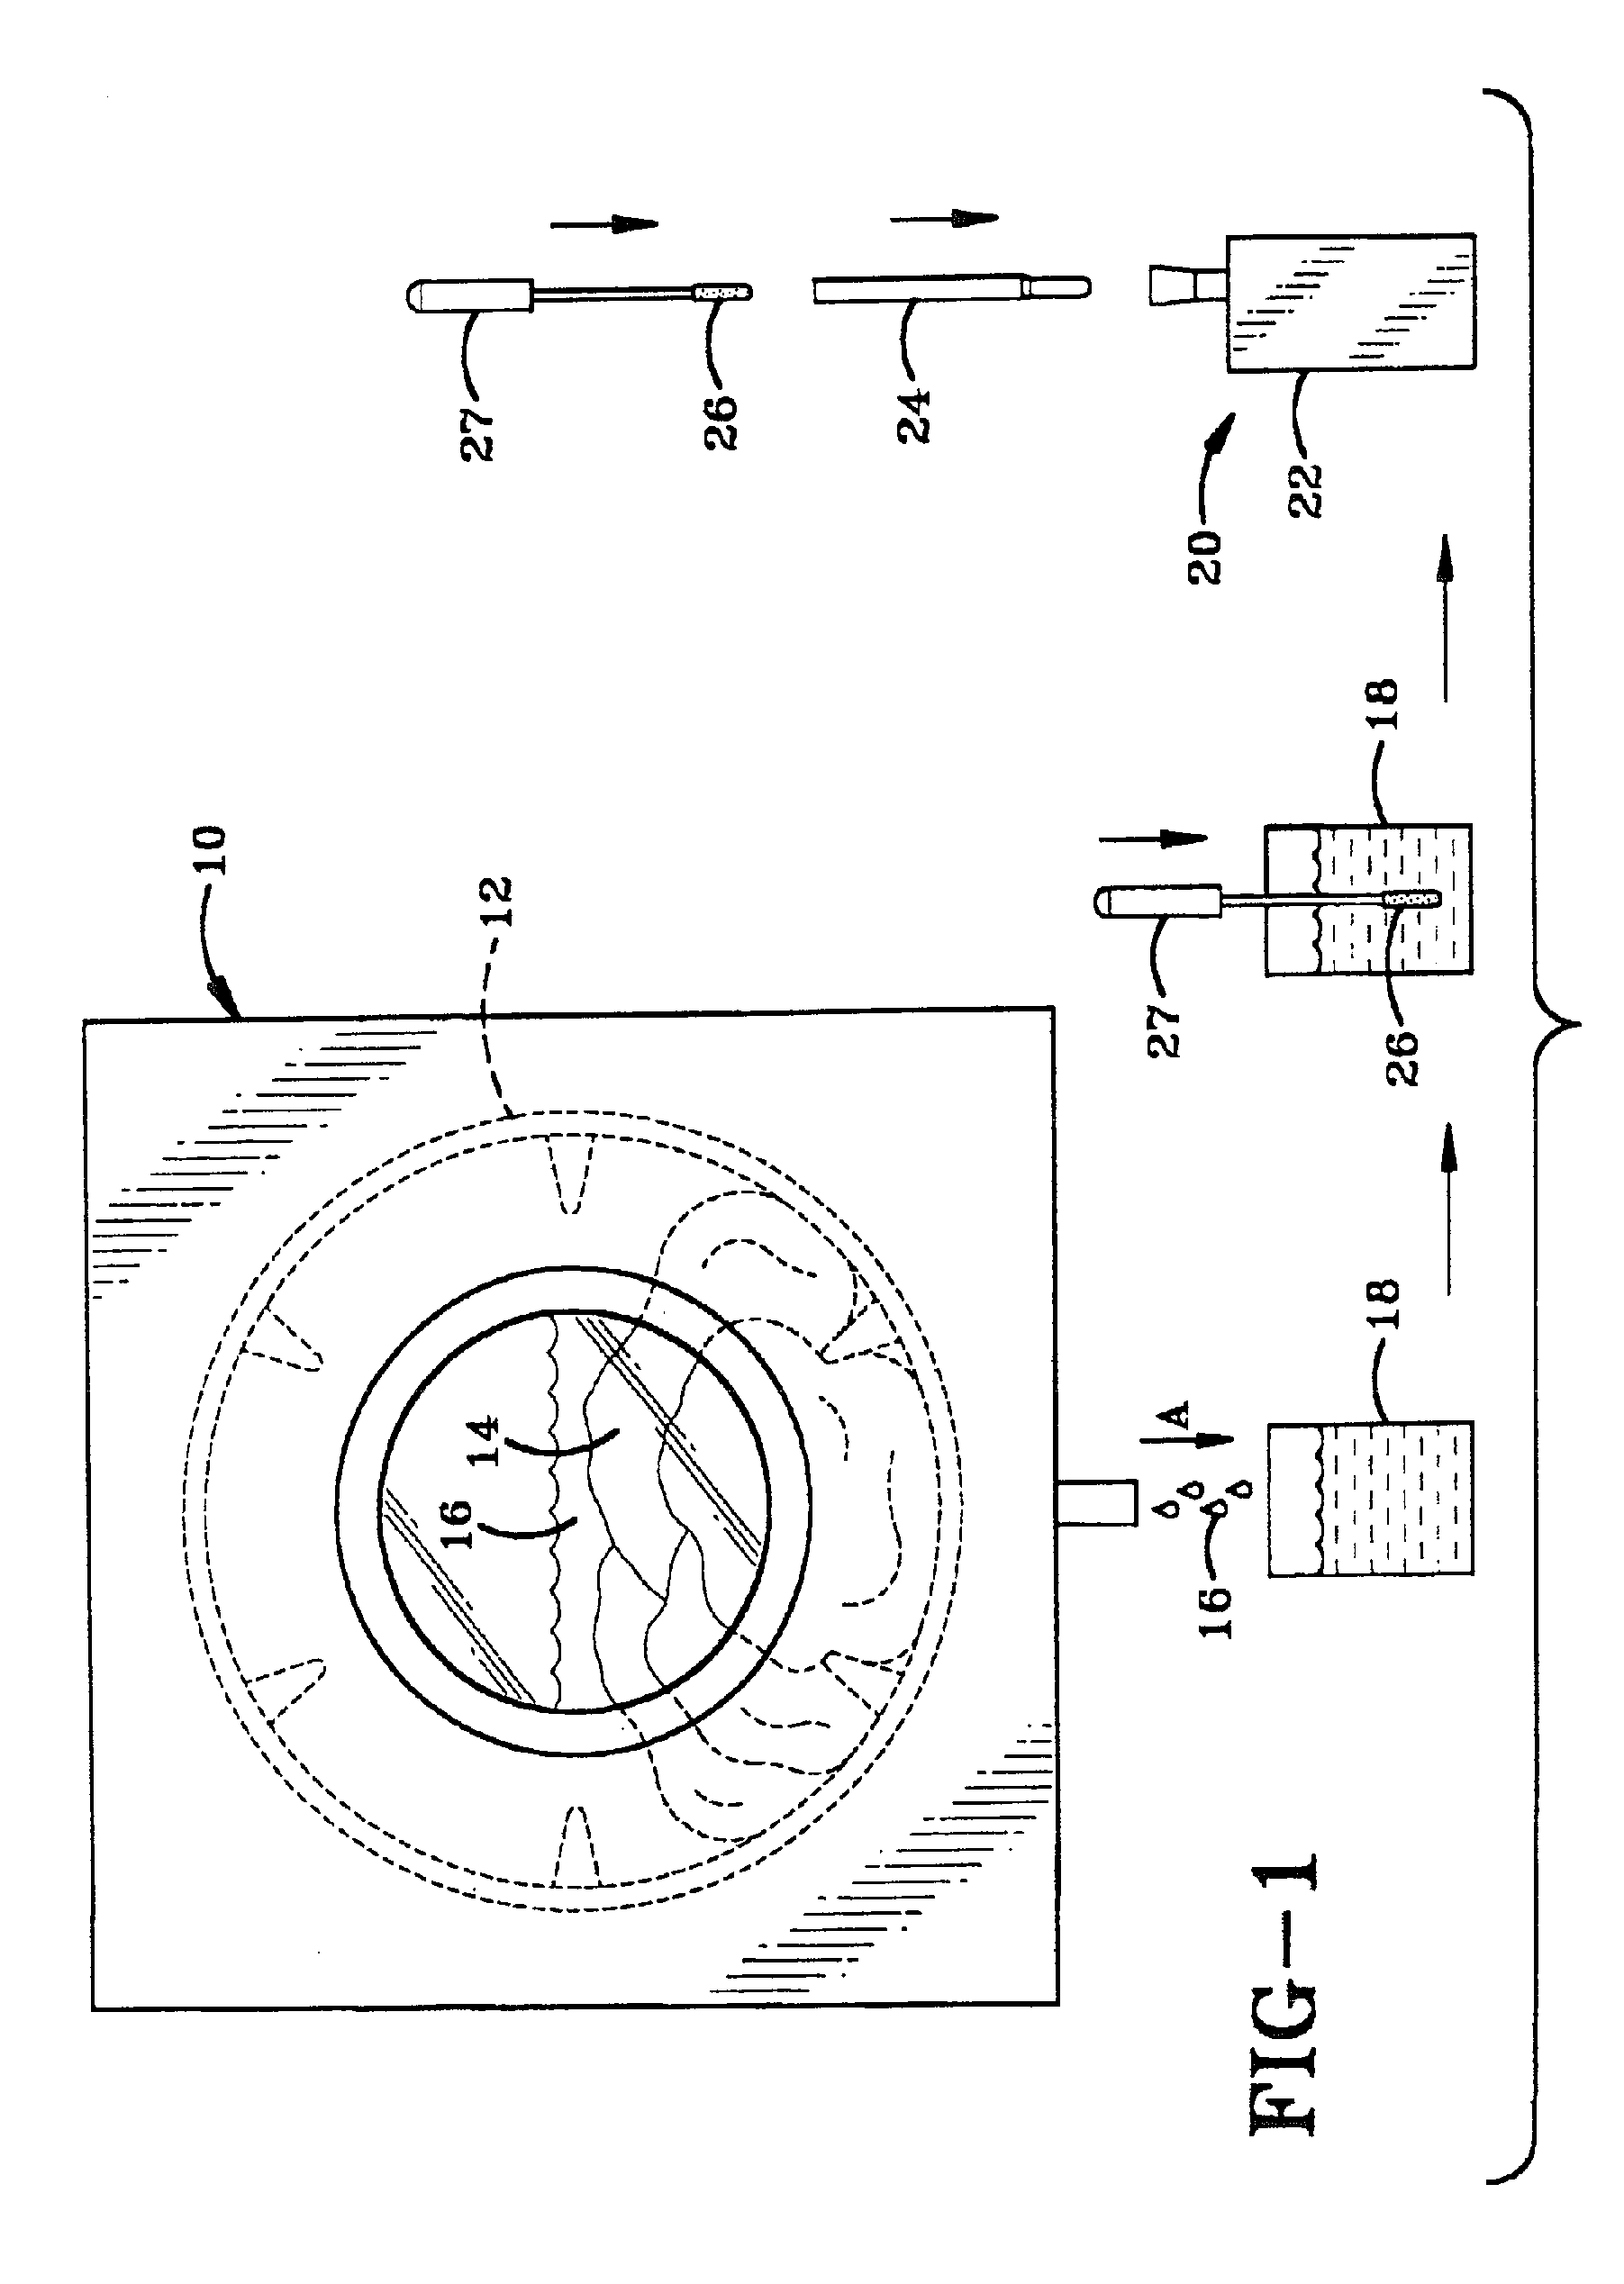 Method of testing for atp load in commercial laundry and for data tracking the results